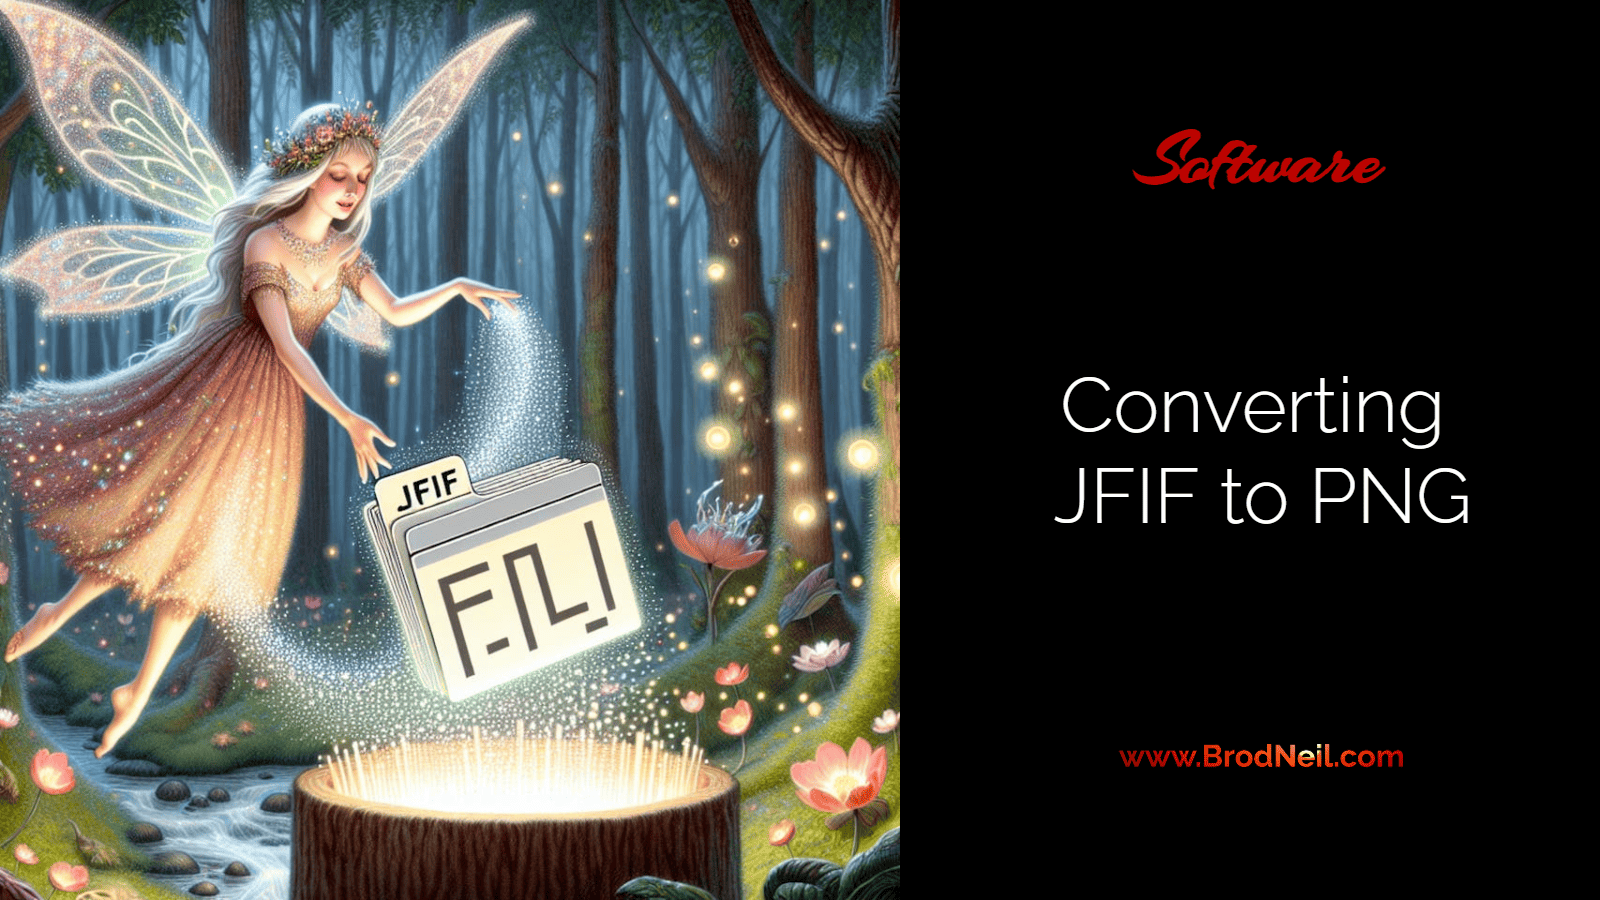 Converting JFIF to PNG